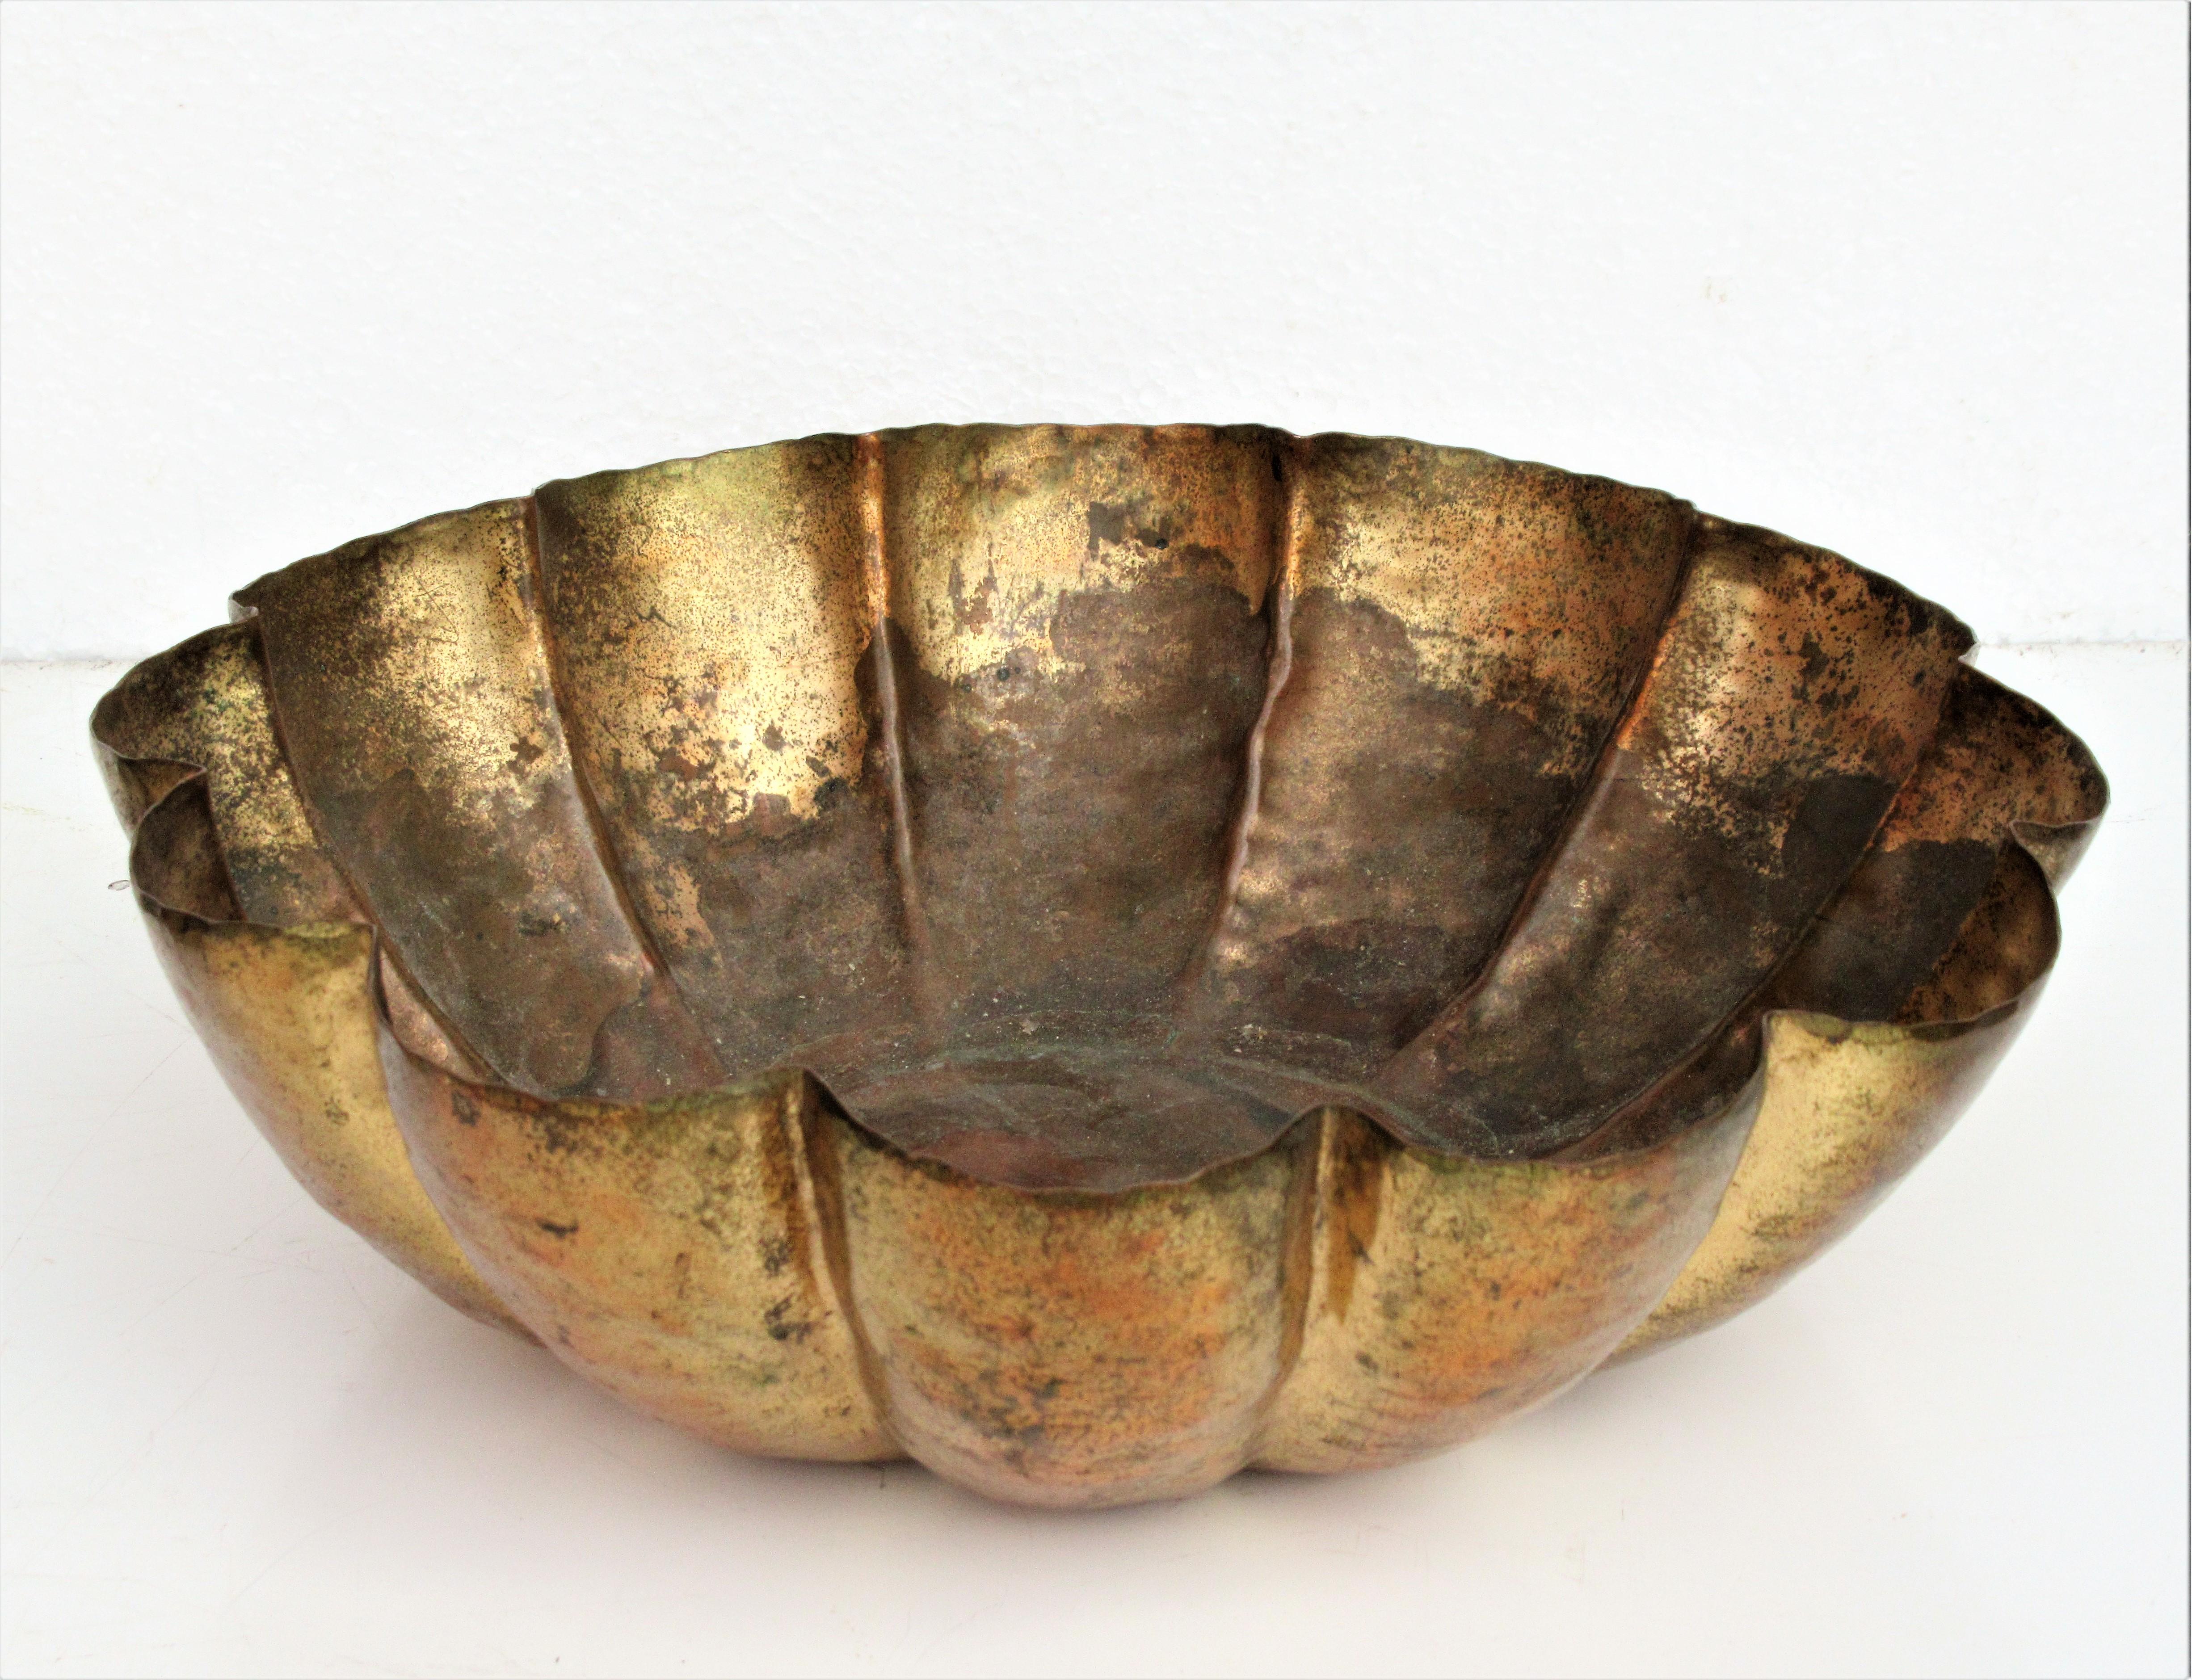 A large American Arts & Crafts hammered copper scallop form bowl with beautifully aged patinated and oxidized surface. The bowl is signed on underside with the early period hallmark - Craftsman Studio - handmade - Laguna Beach, Calif. - 831 - which